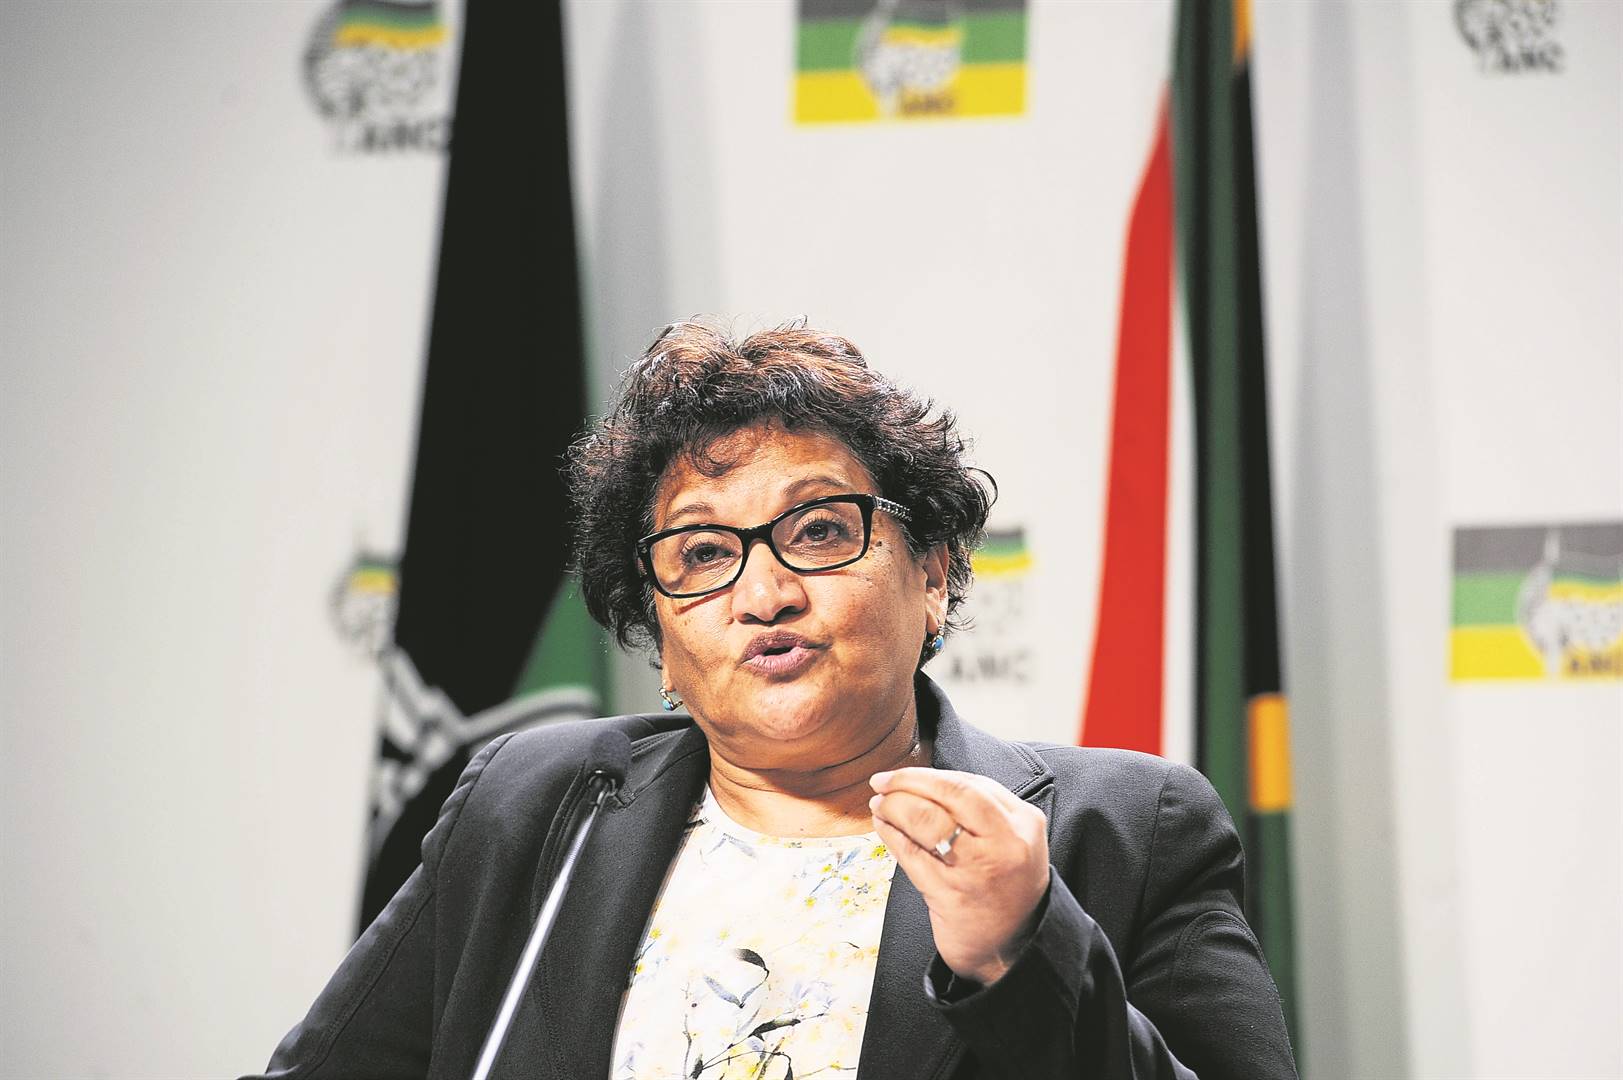 ANC’s deputy secretary-general, Jessie Duarte, said the party had managed to register all its candidates. Photo: File